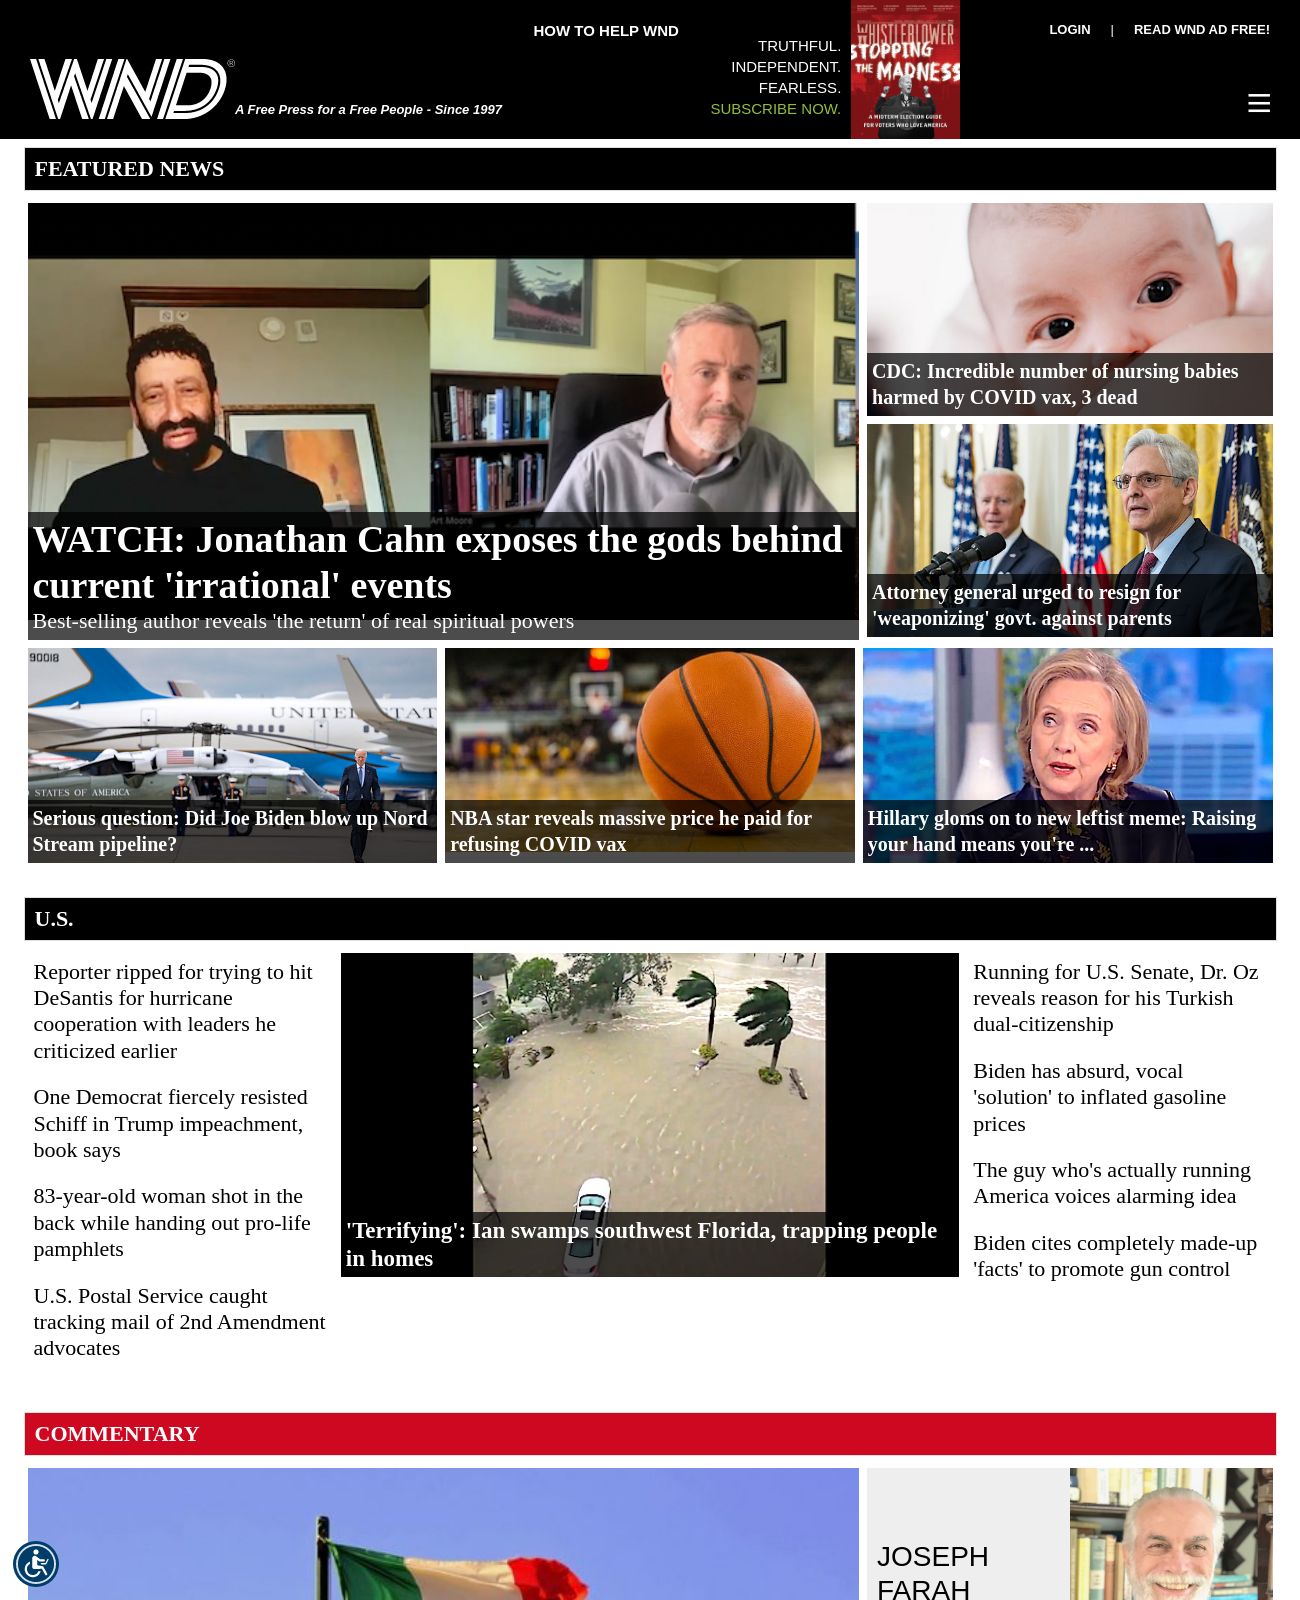 WND News at 2022-09-29 03:34:42-04:00 local time